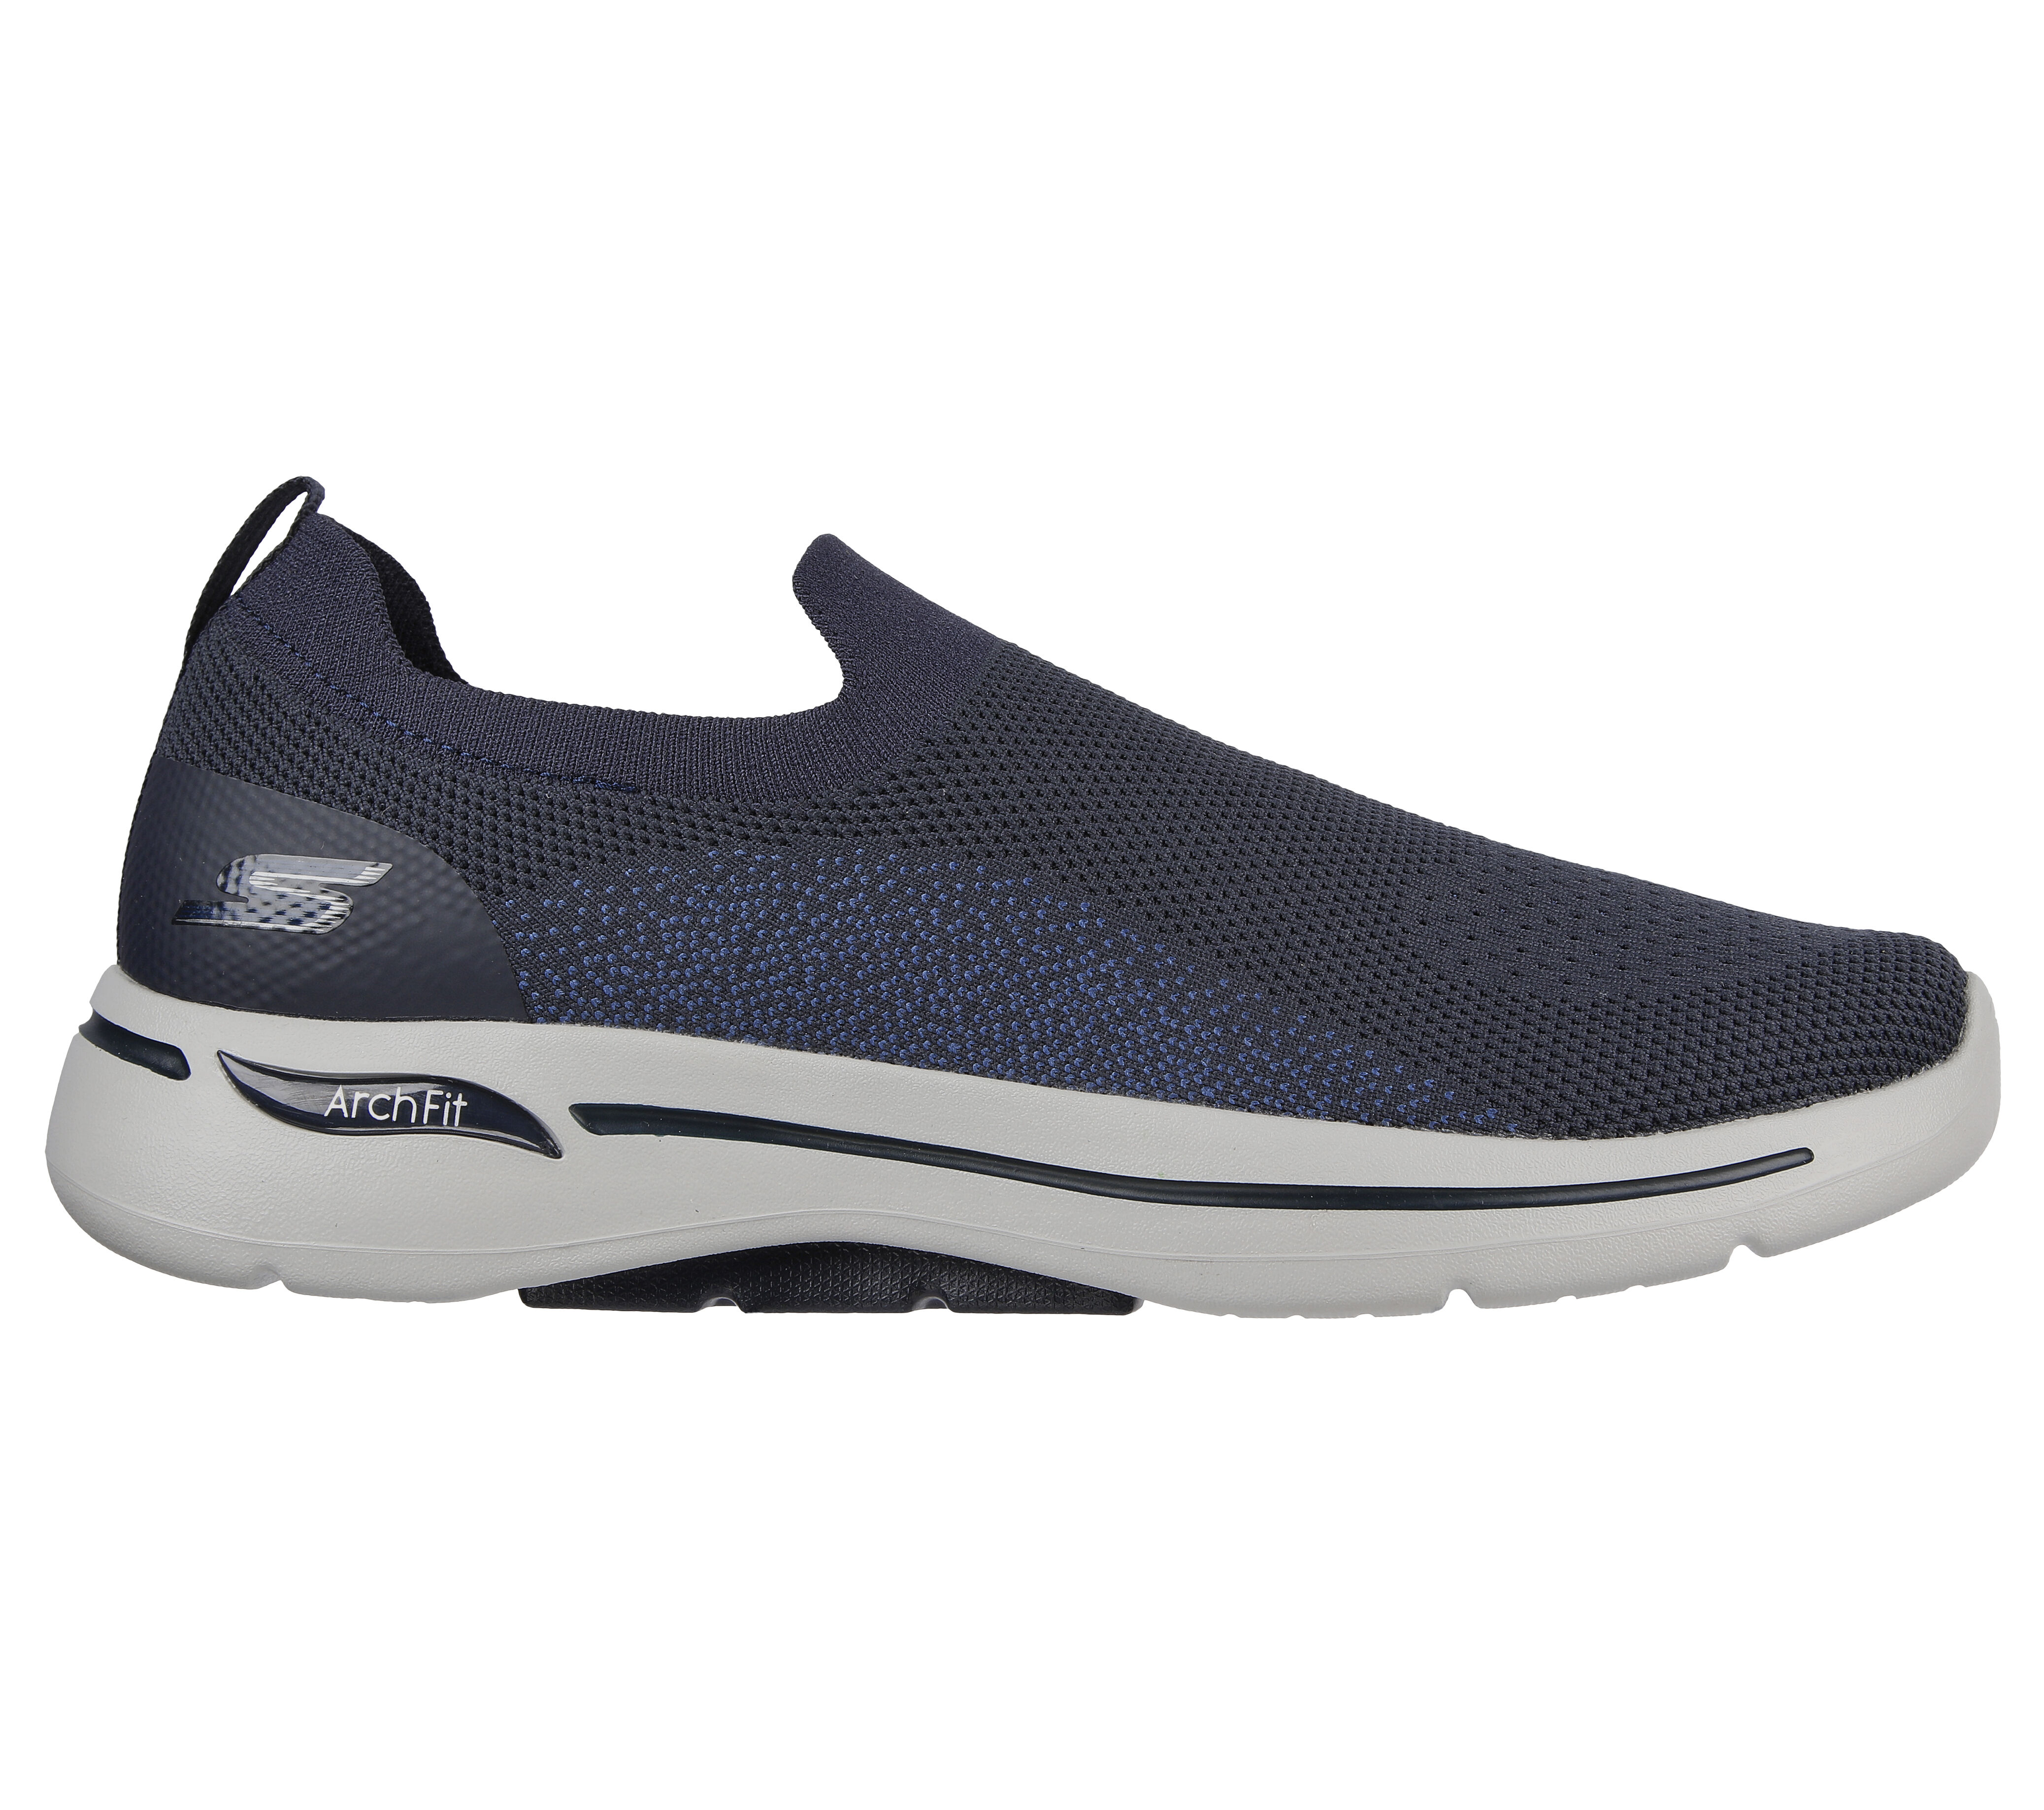 skechers shoes without less